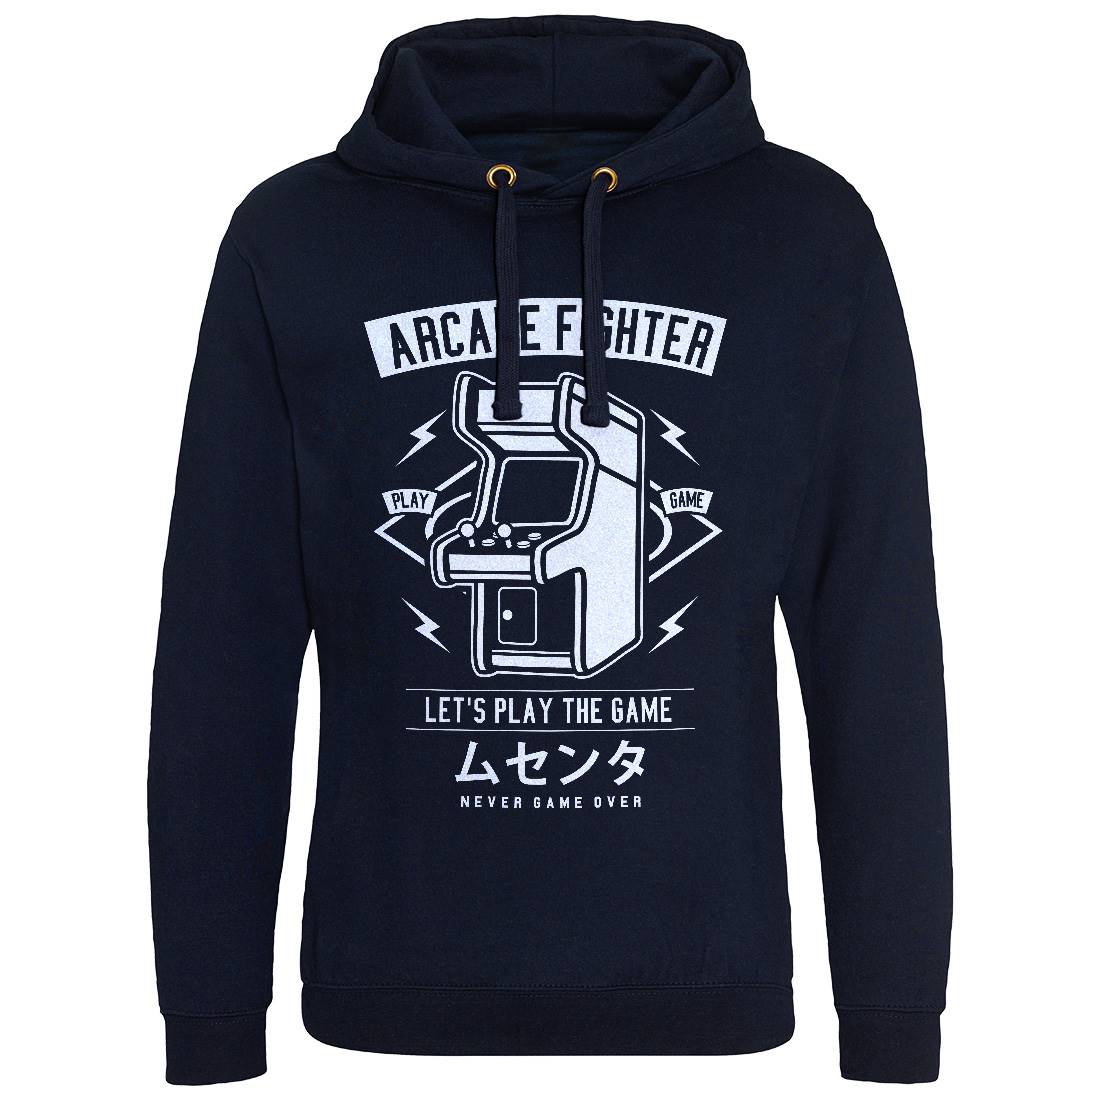 Arcade Fighter Mens Hoodie Without Pocket Geek A201